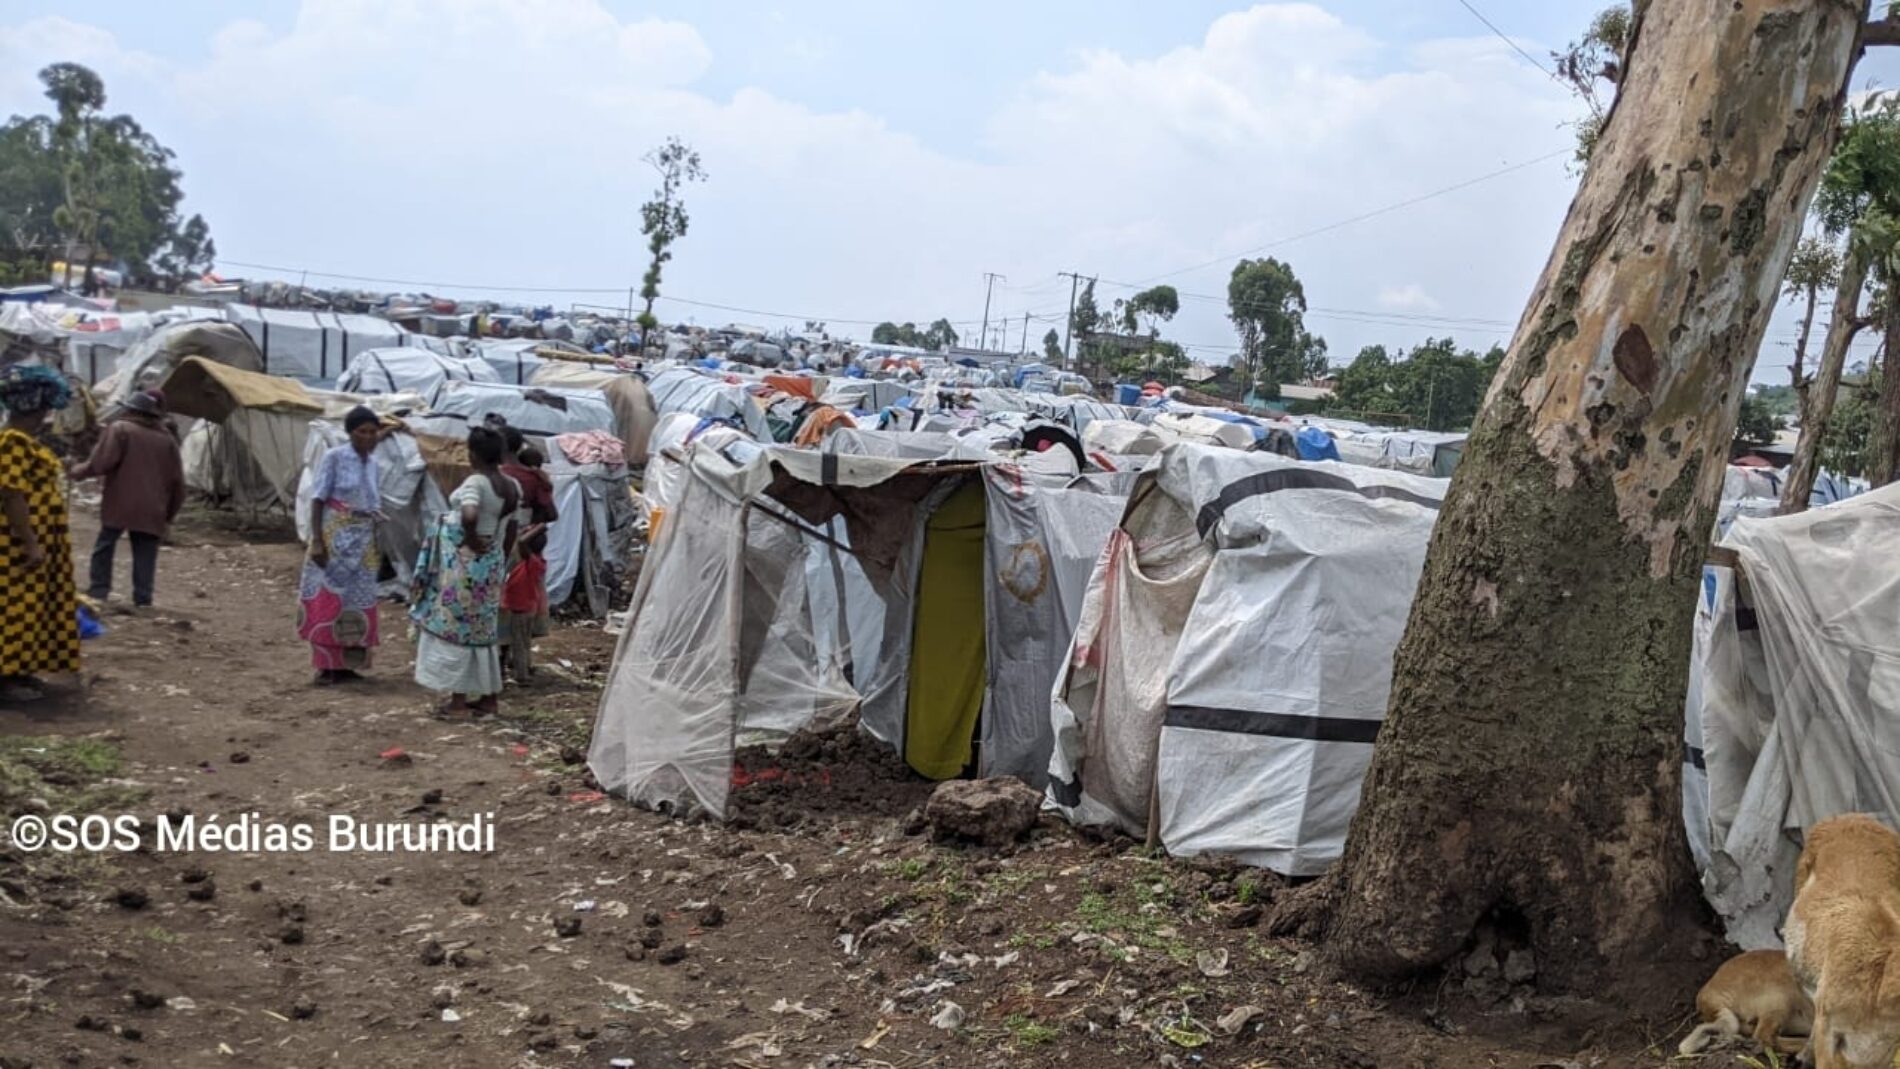 Nyiragongo: alarming humanitarian situation of displaced people from the Kasenyi Adventist site